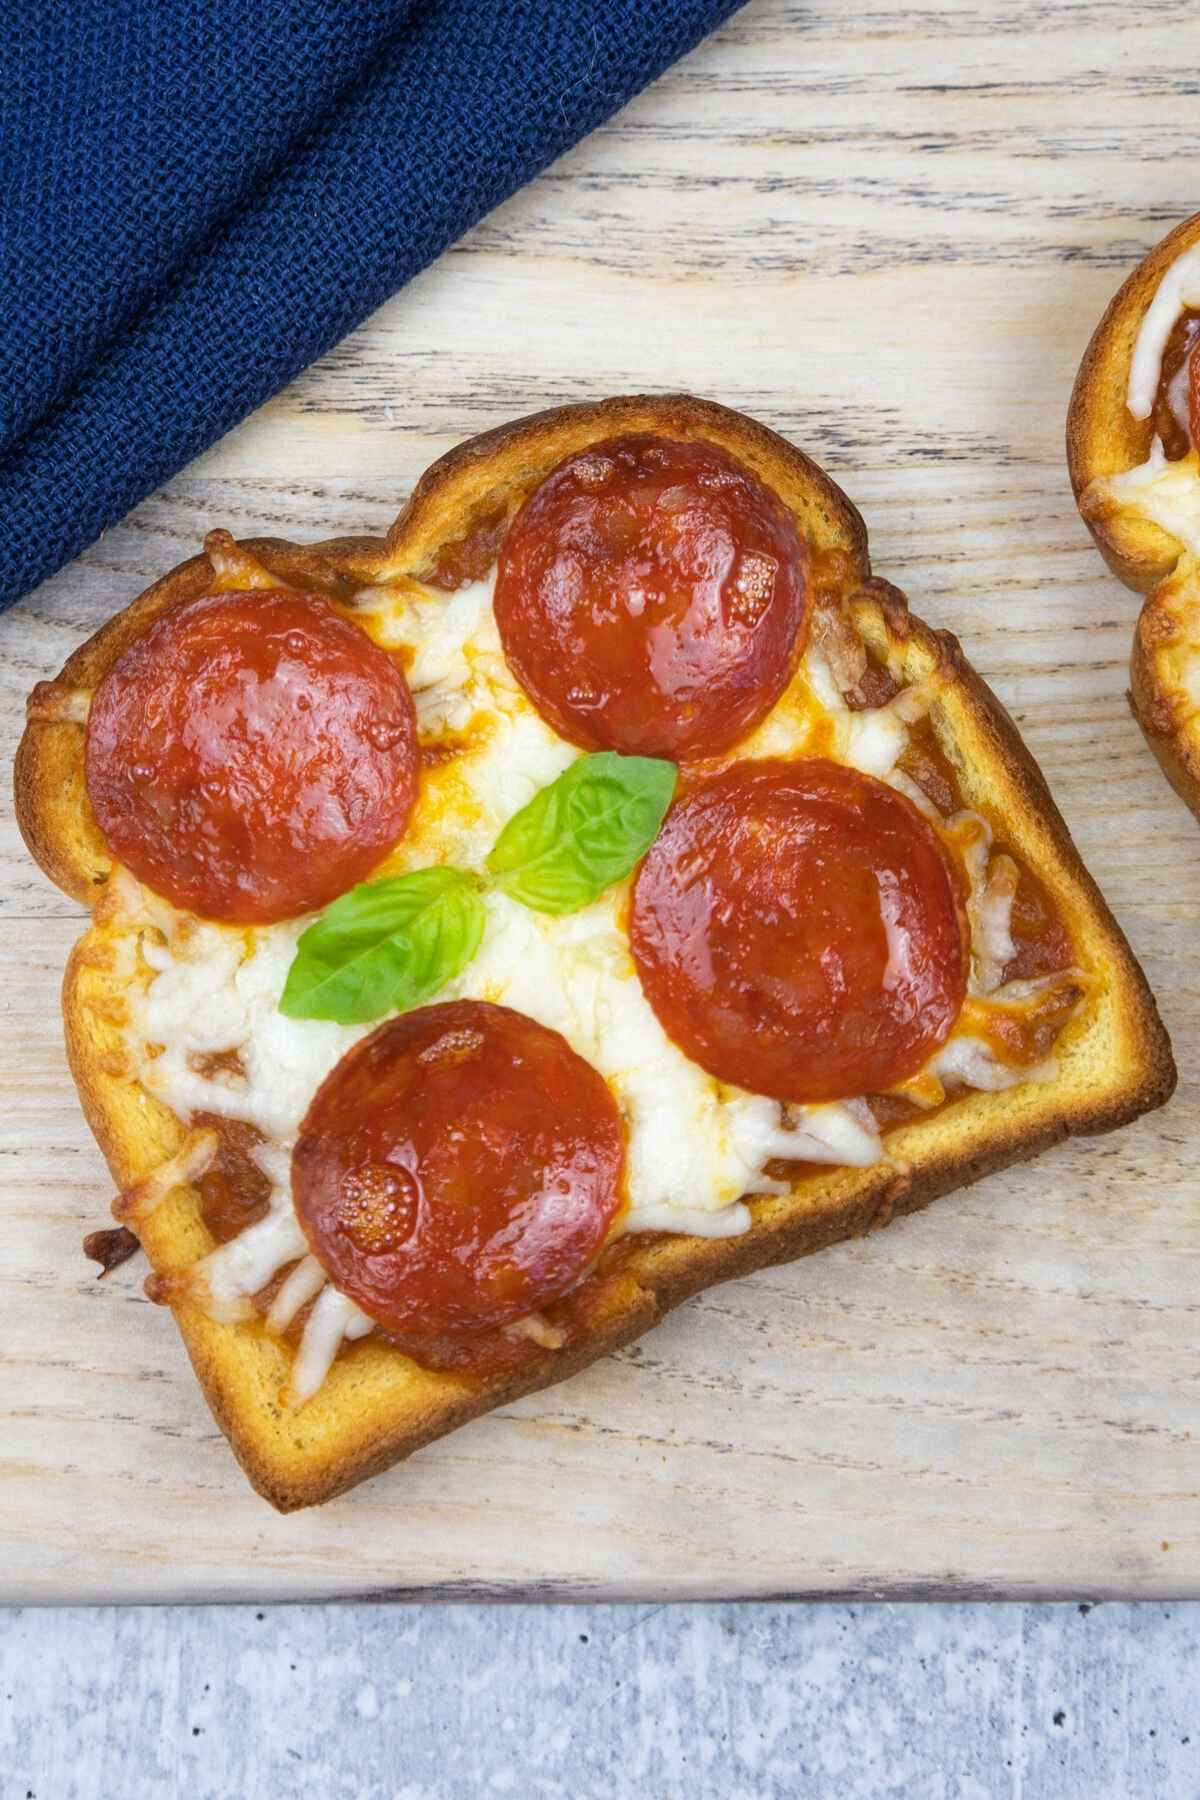 One slice of pizza toast with melty cheese and golden brown edges.